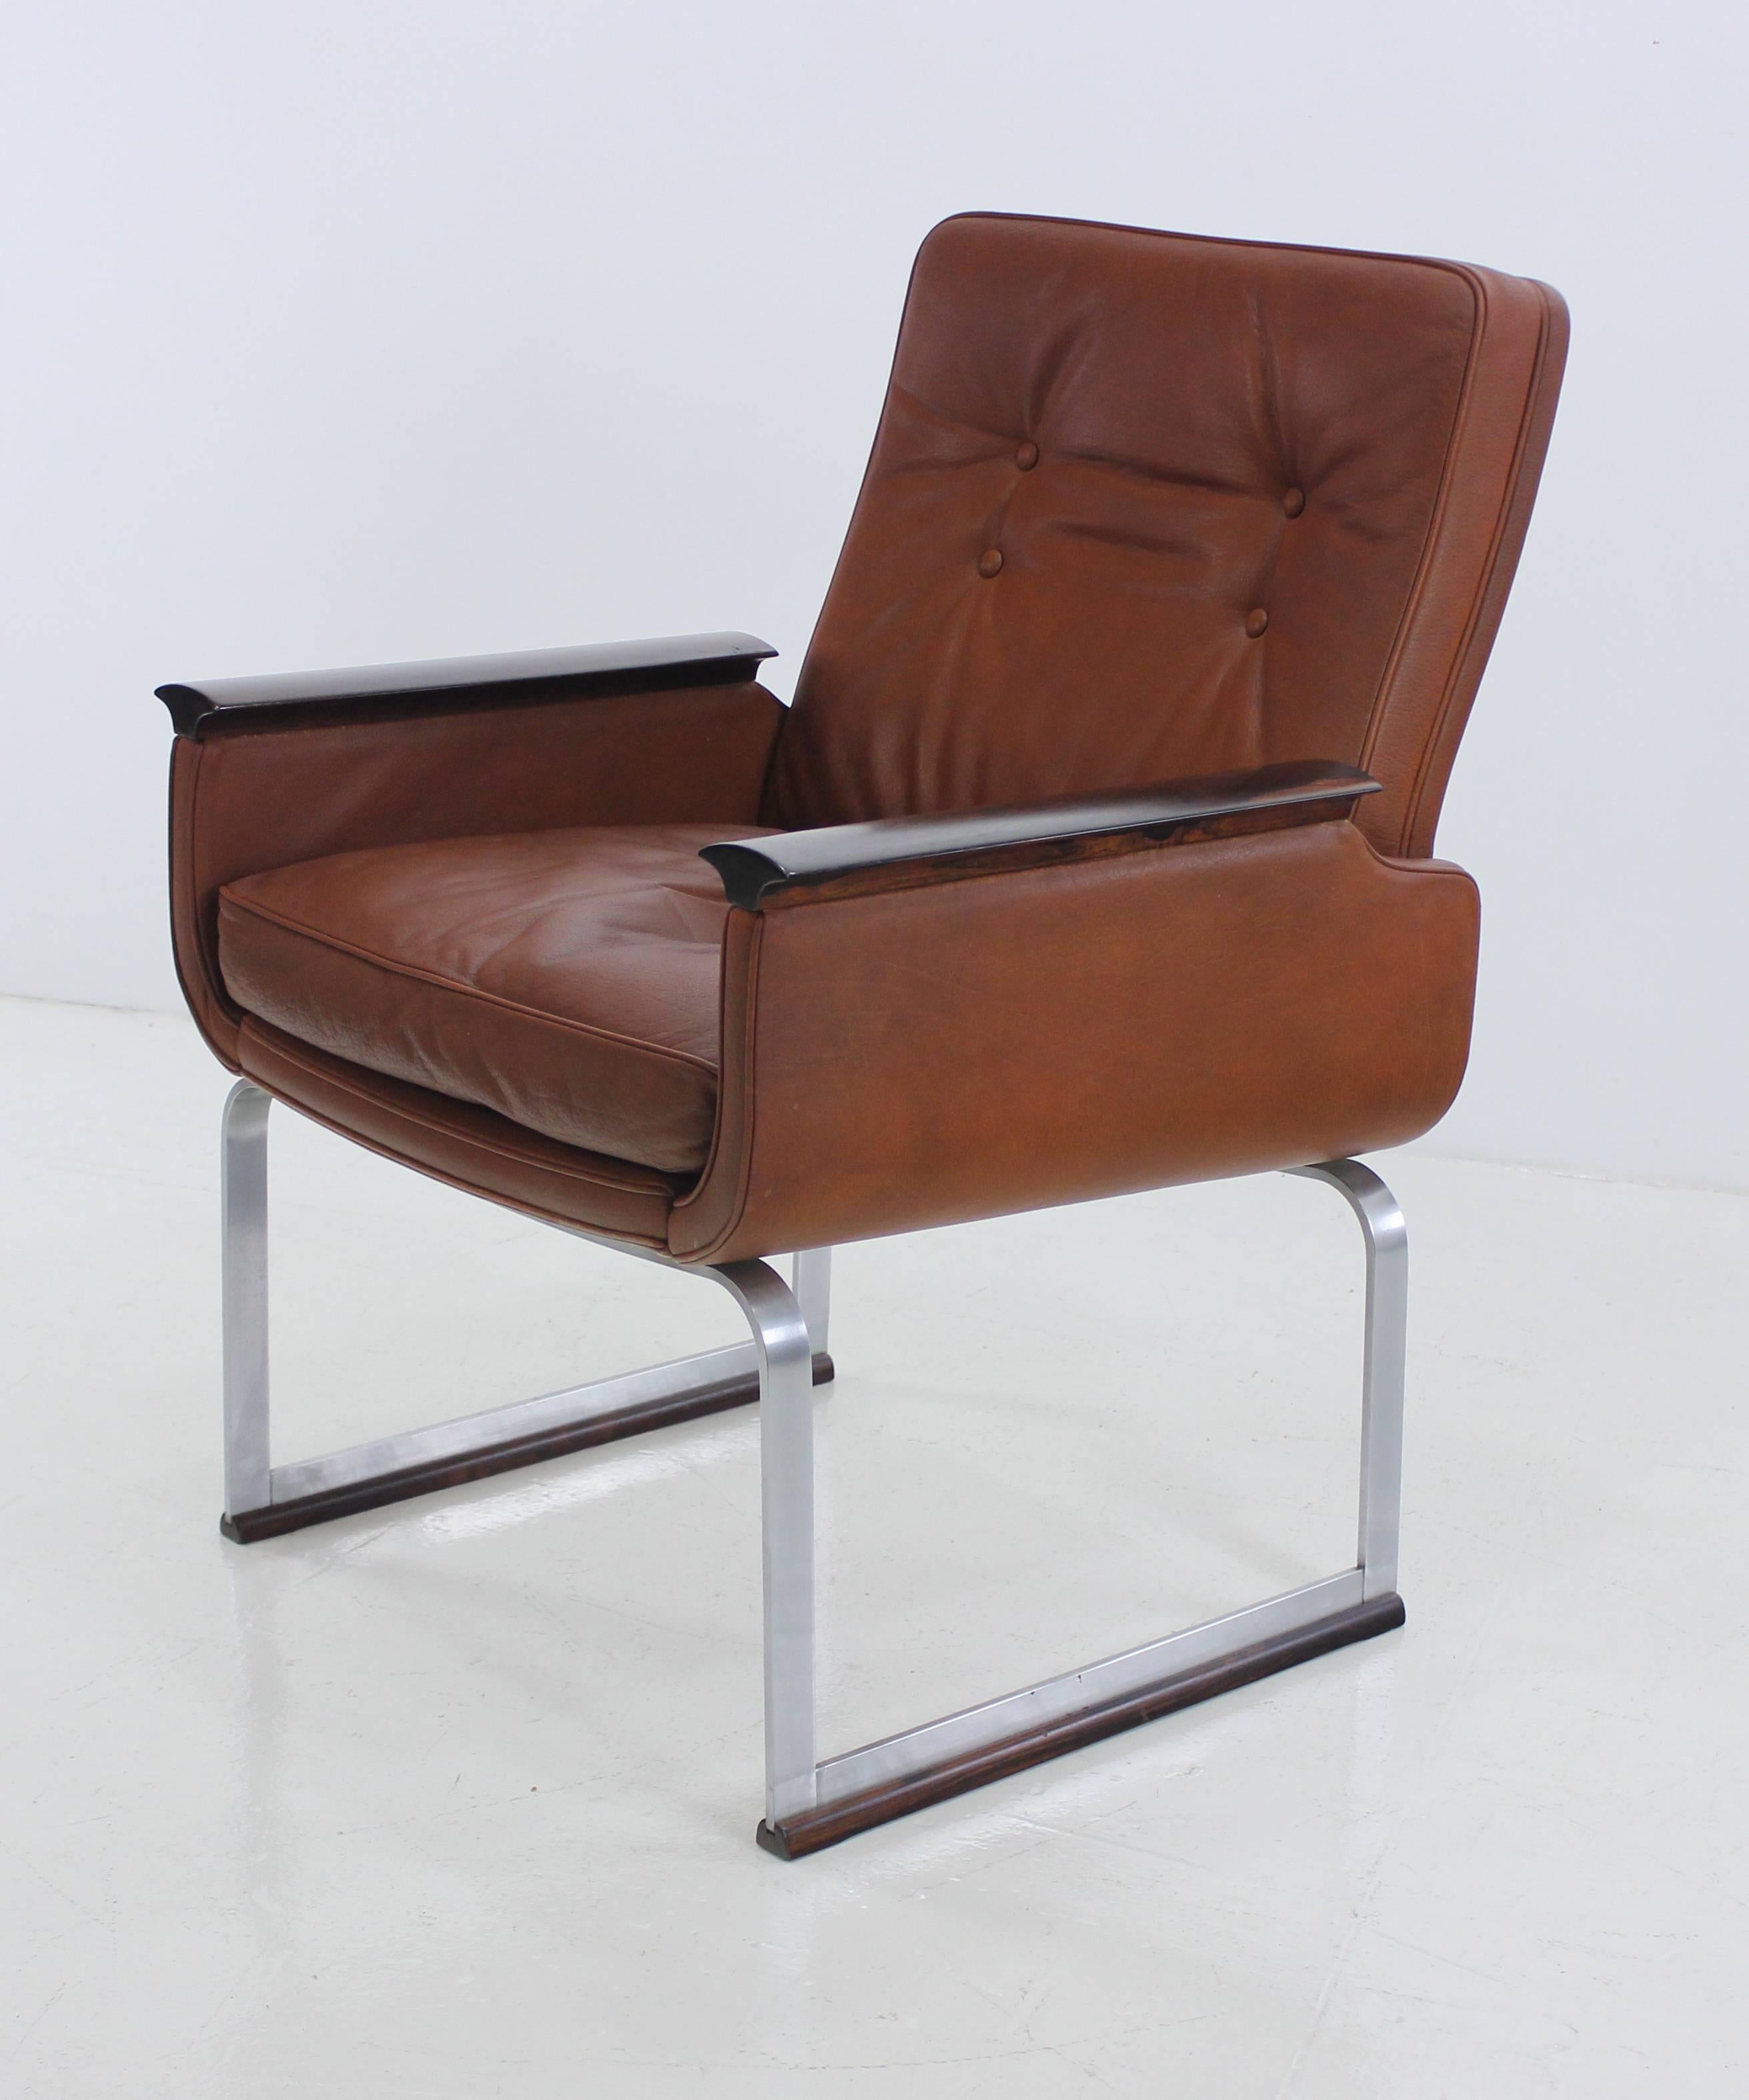 Pair of Danish Modern Steel and Leather Armchairs by Vatne Mobler In Excellent Condition For Sale In Portland, OR